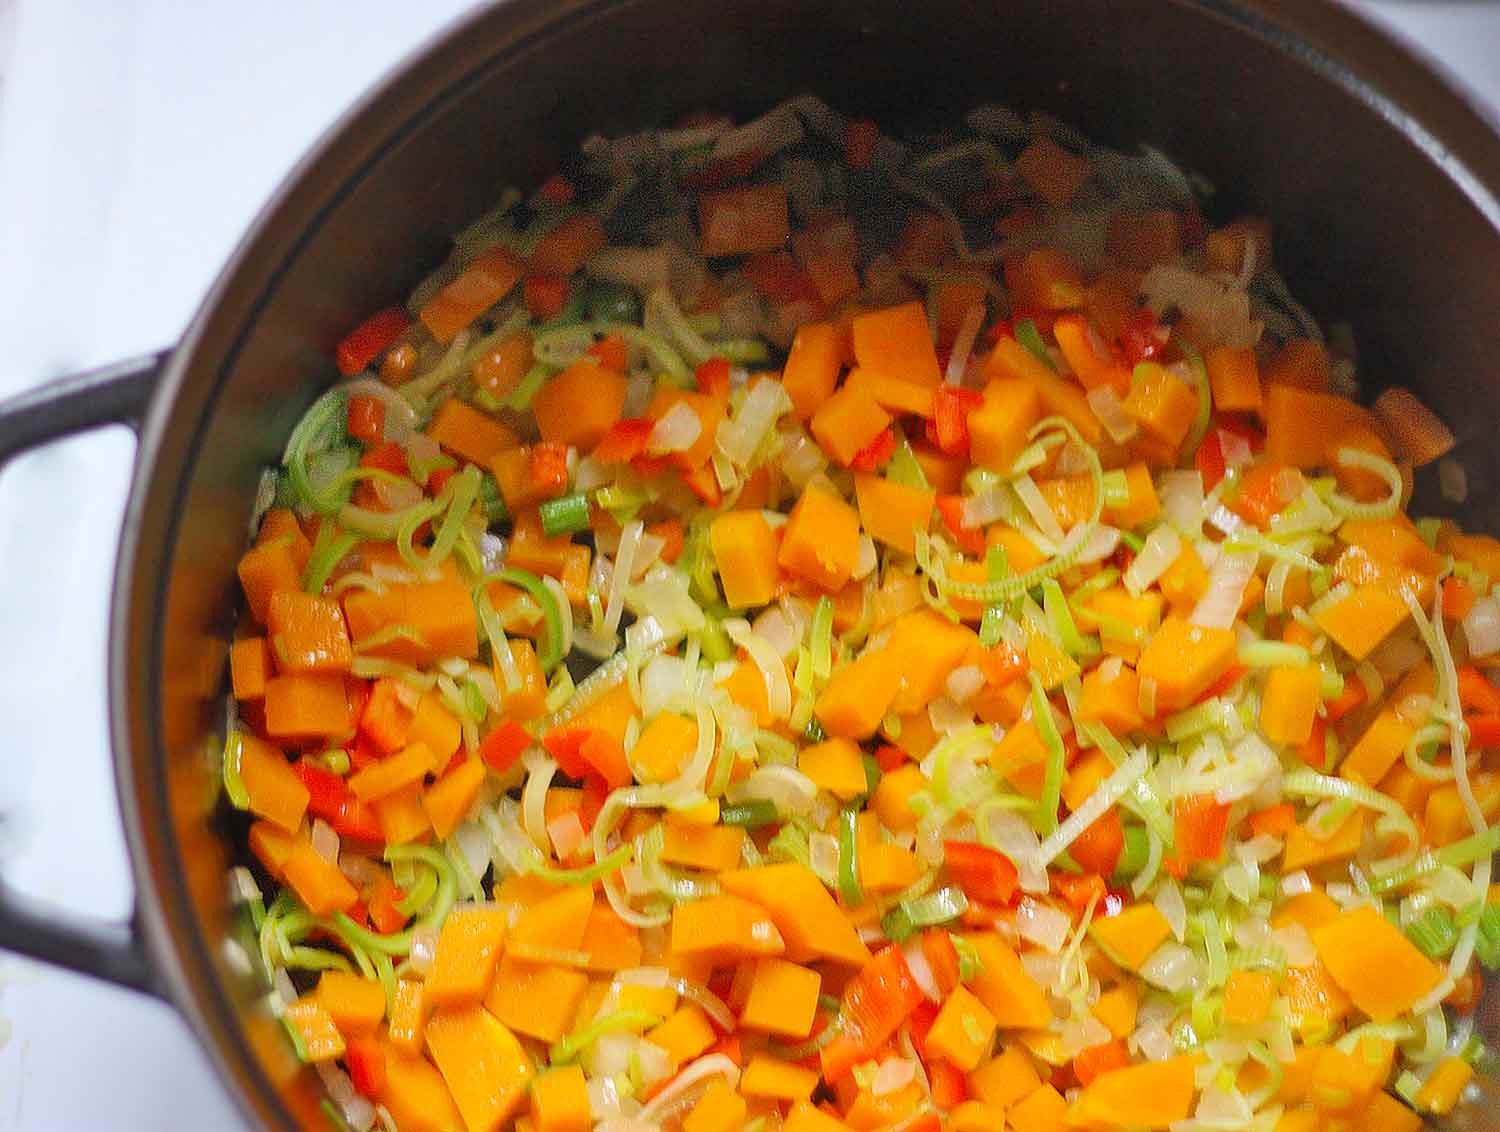 Aromatic vegetables simmering to flavorful goodness.